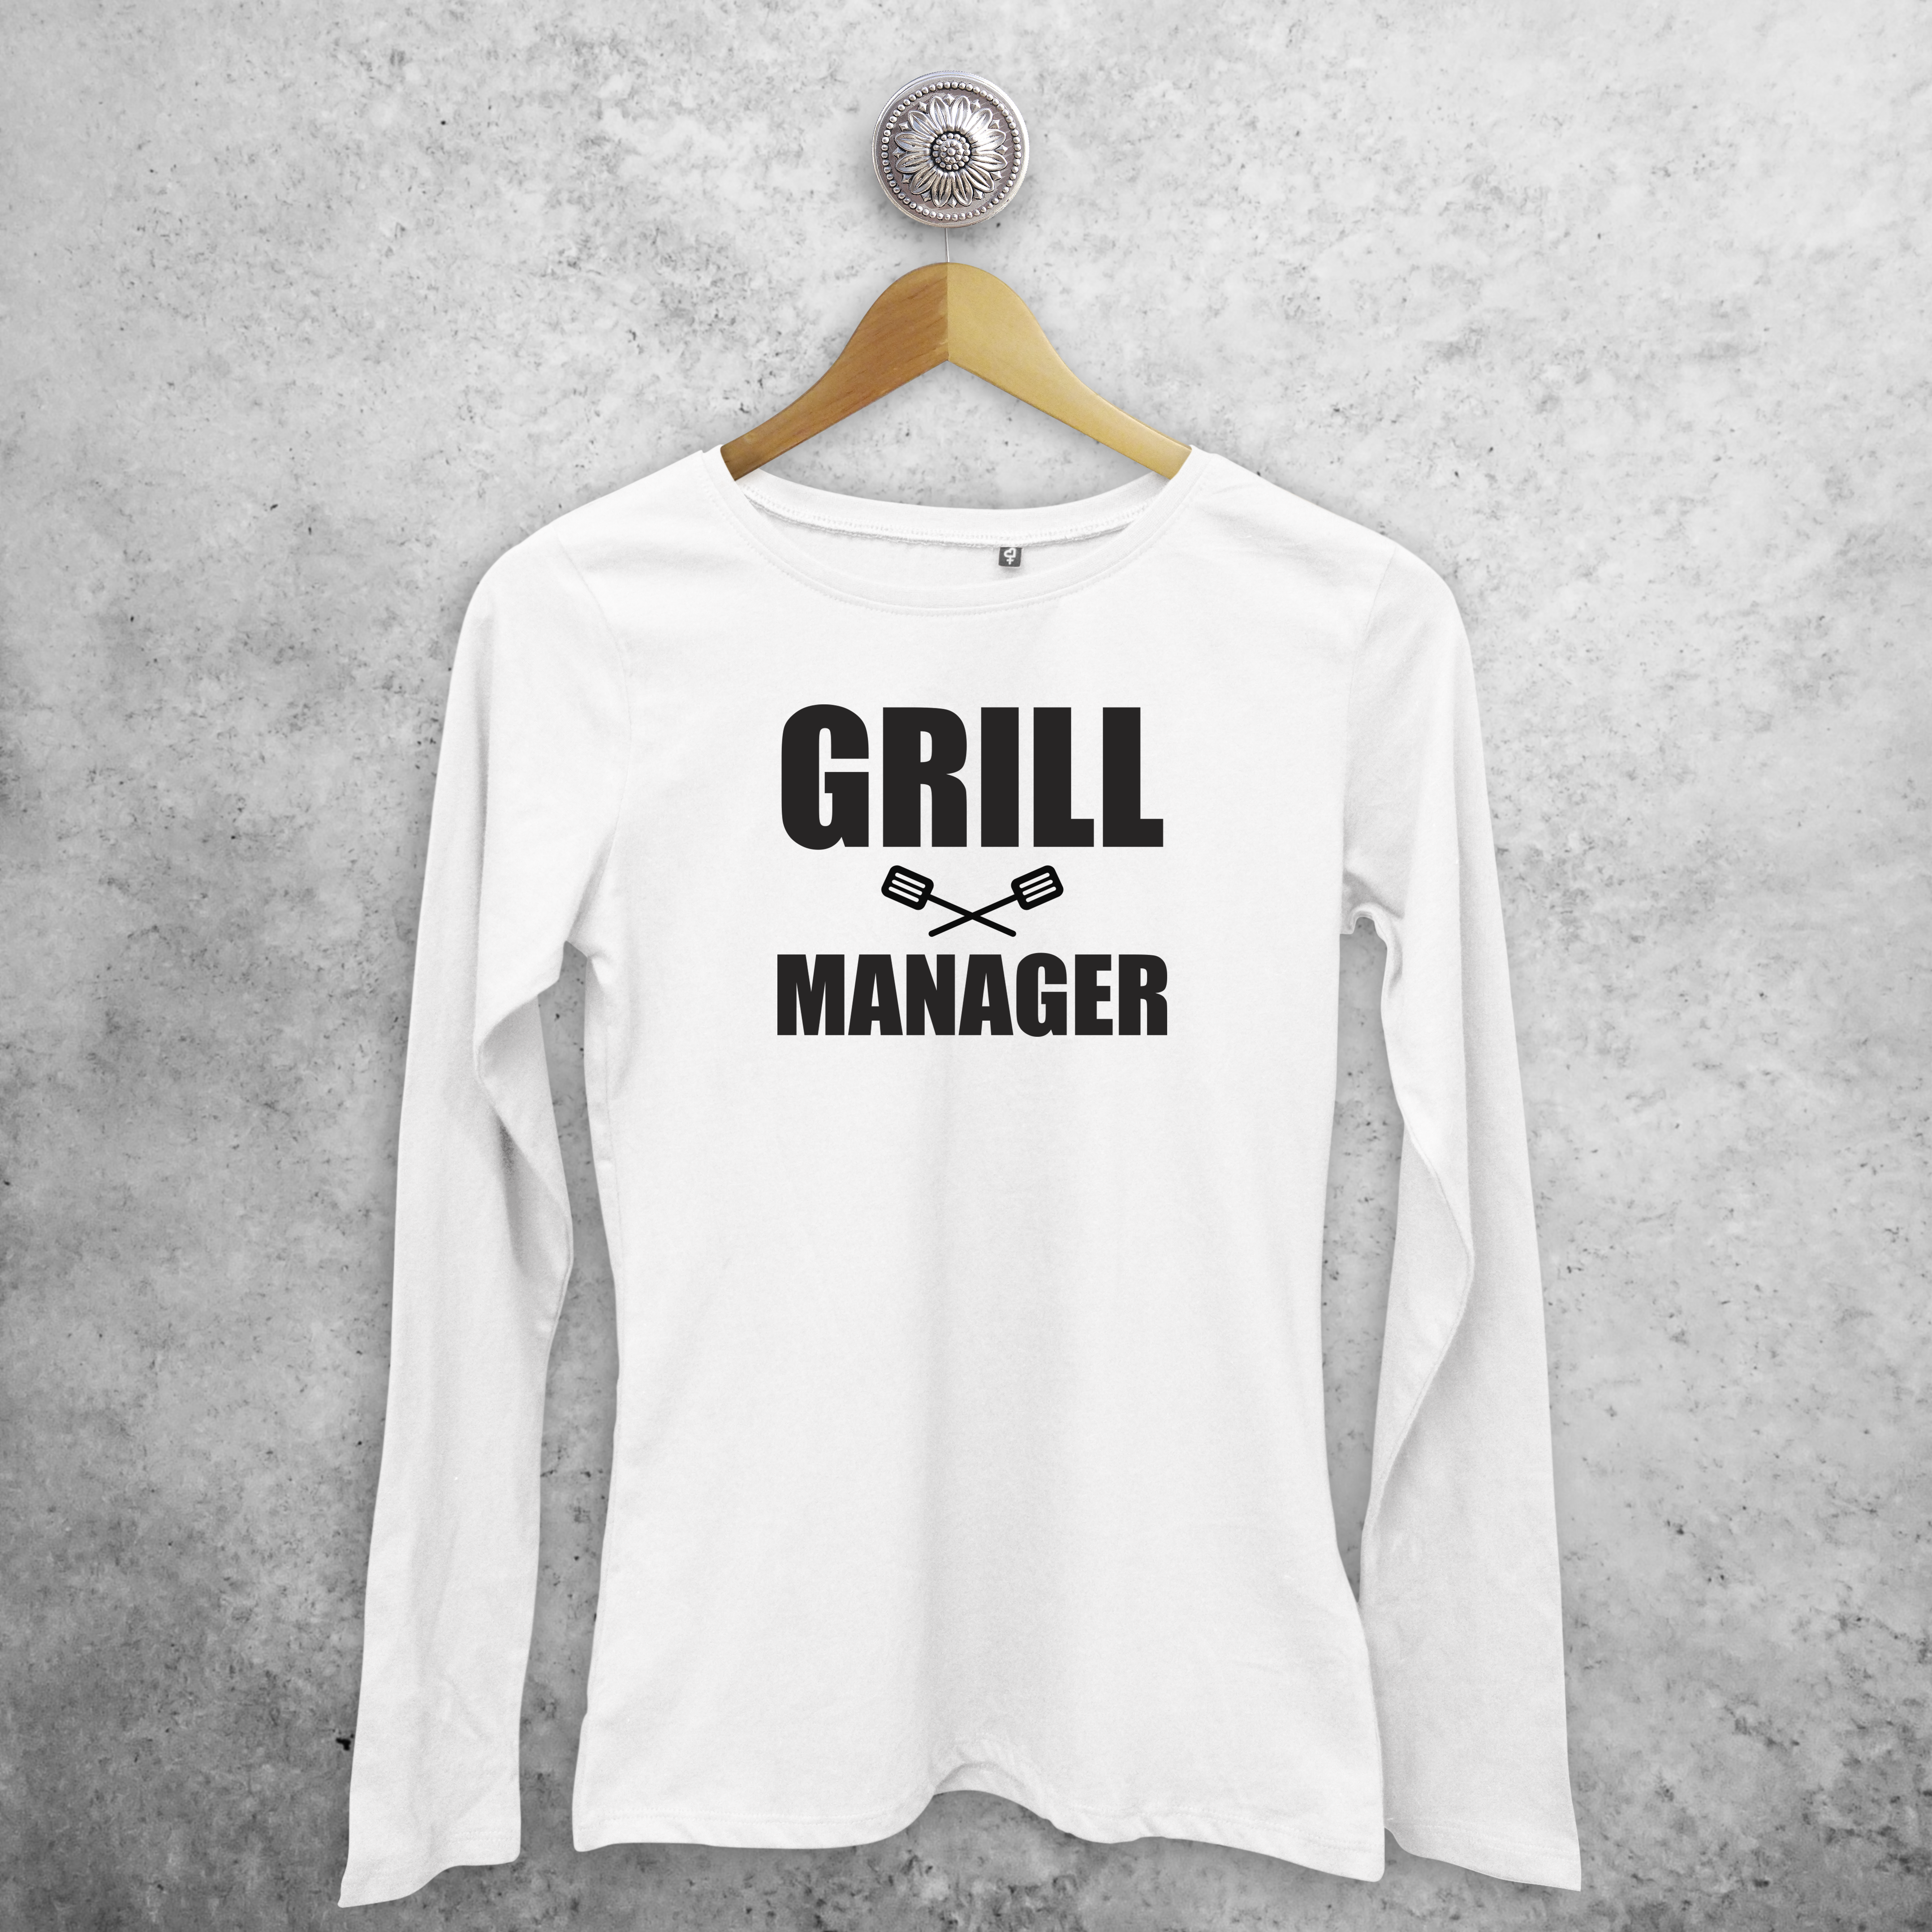 'Grill manager' adult longsleeve shirt